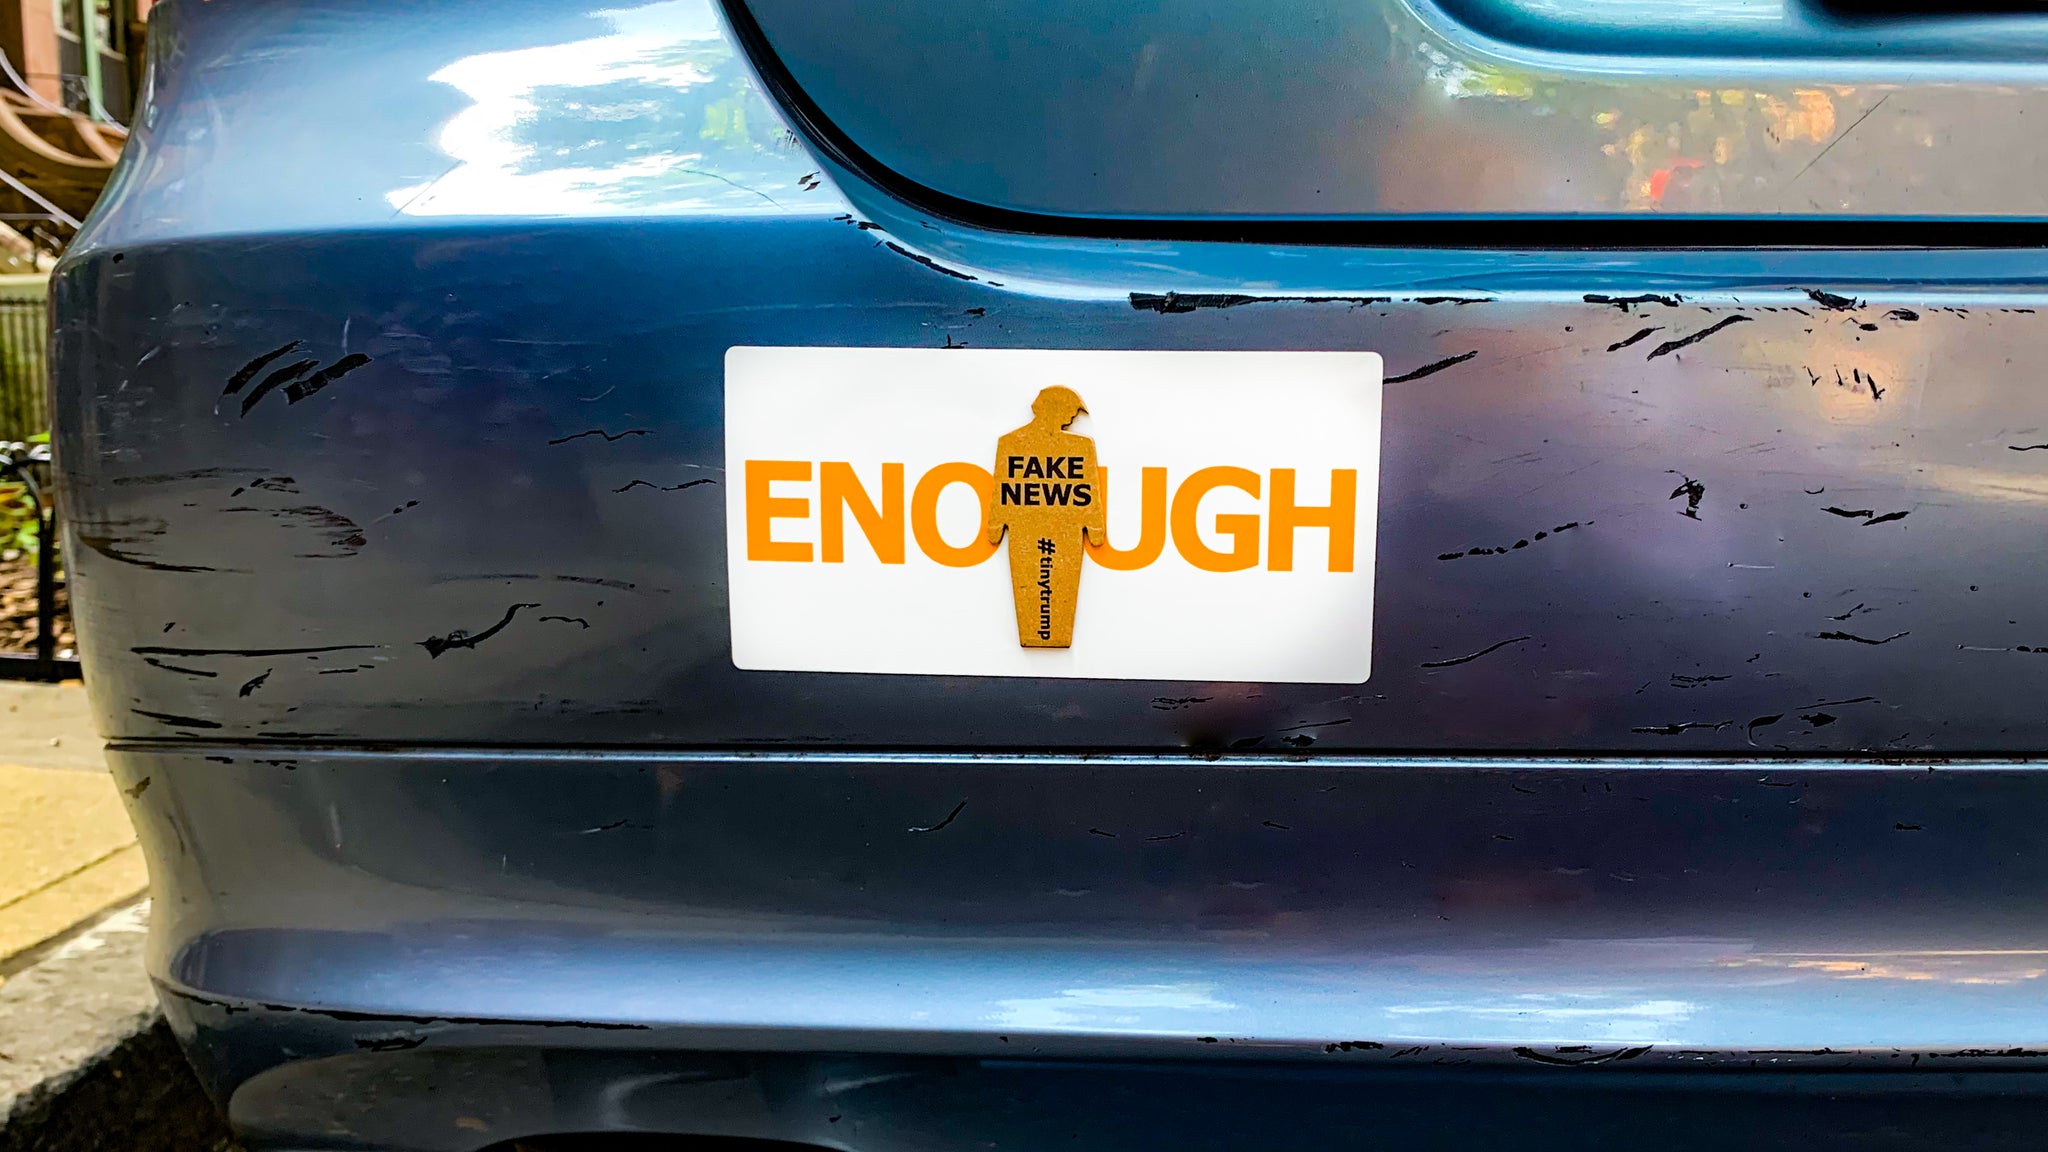 "ENOUGH" tiny trump bumper sticker shown with a "Fake News" tiny trump stuck on top